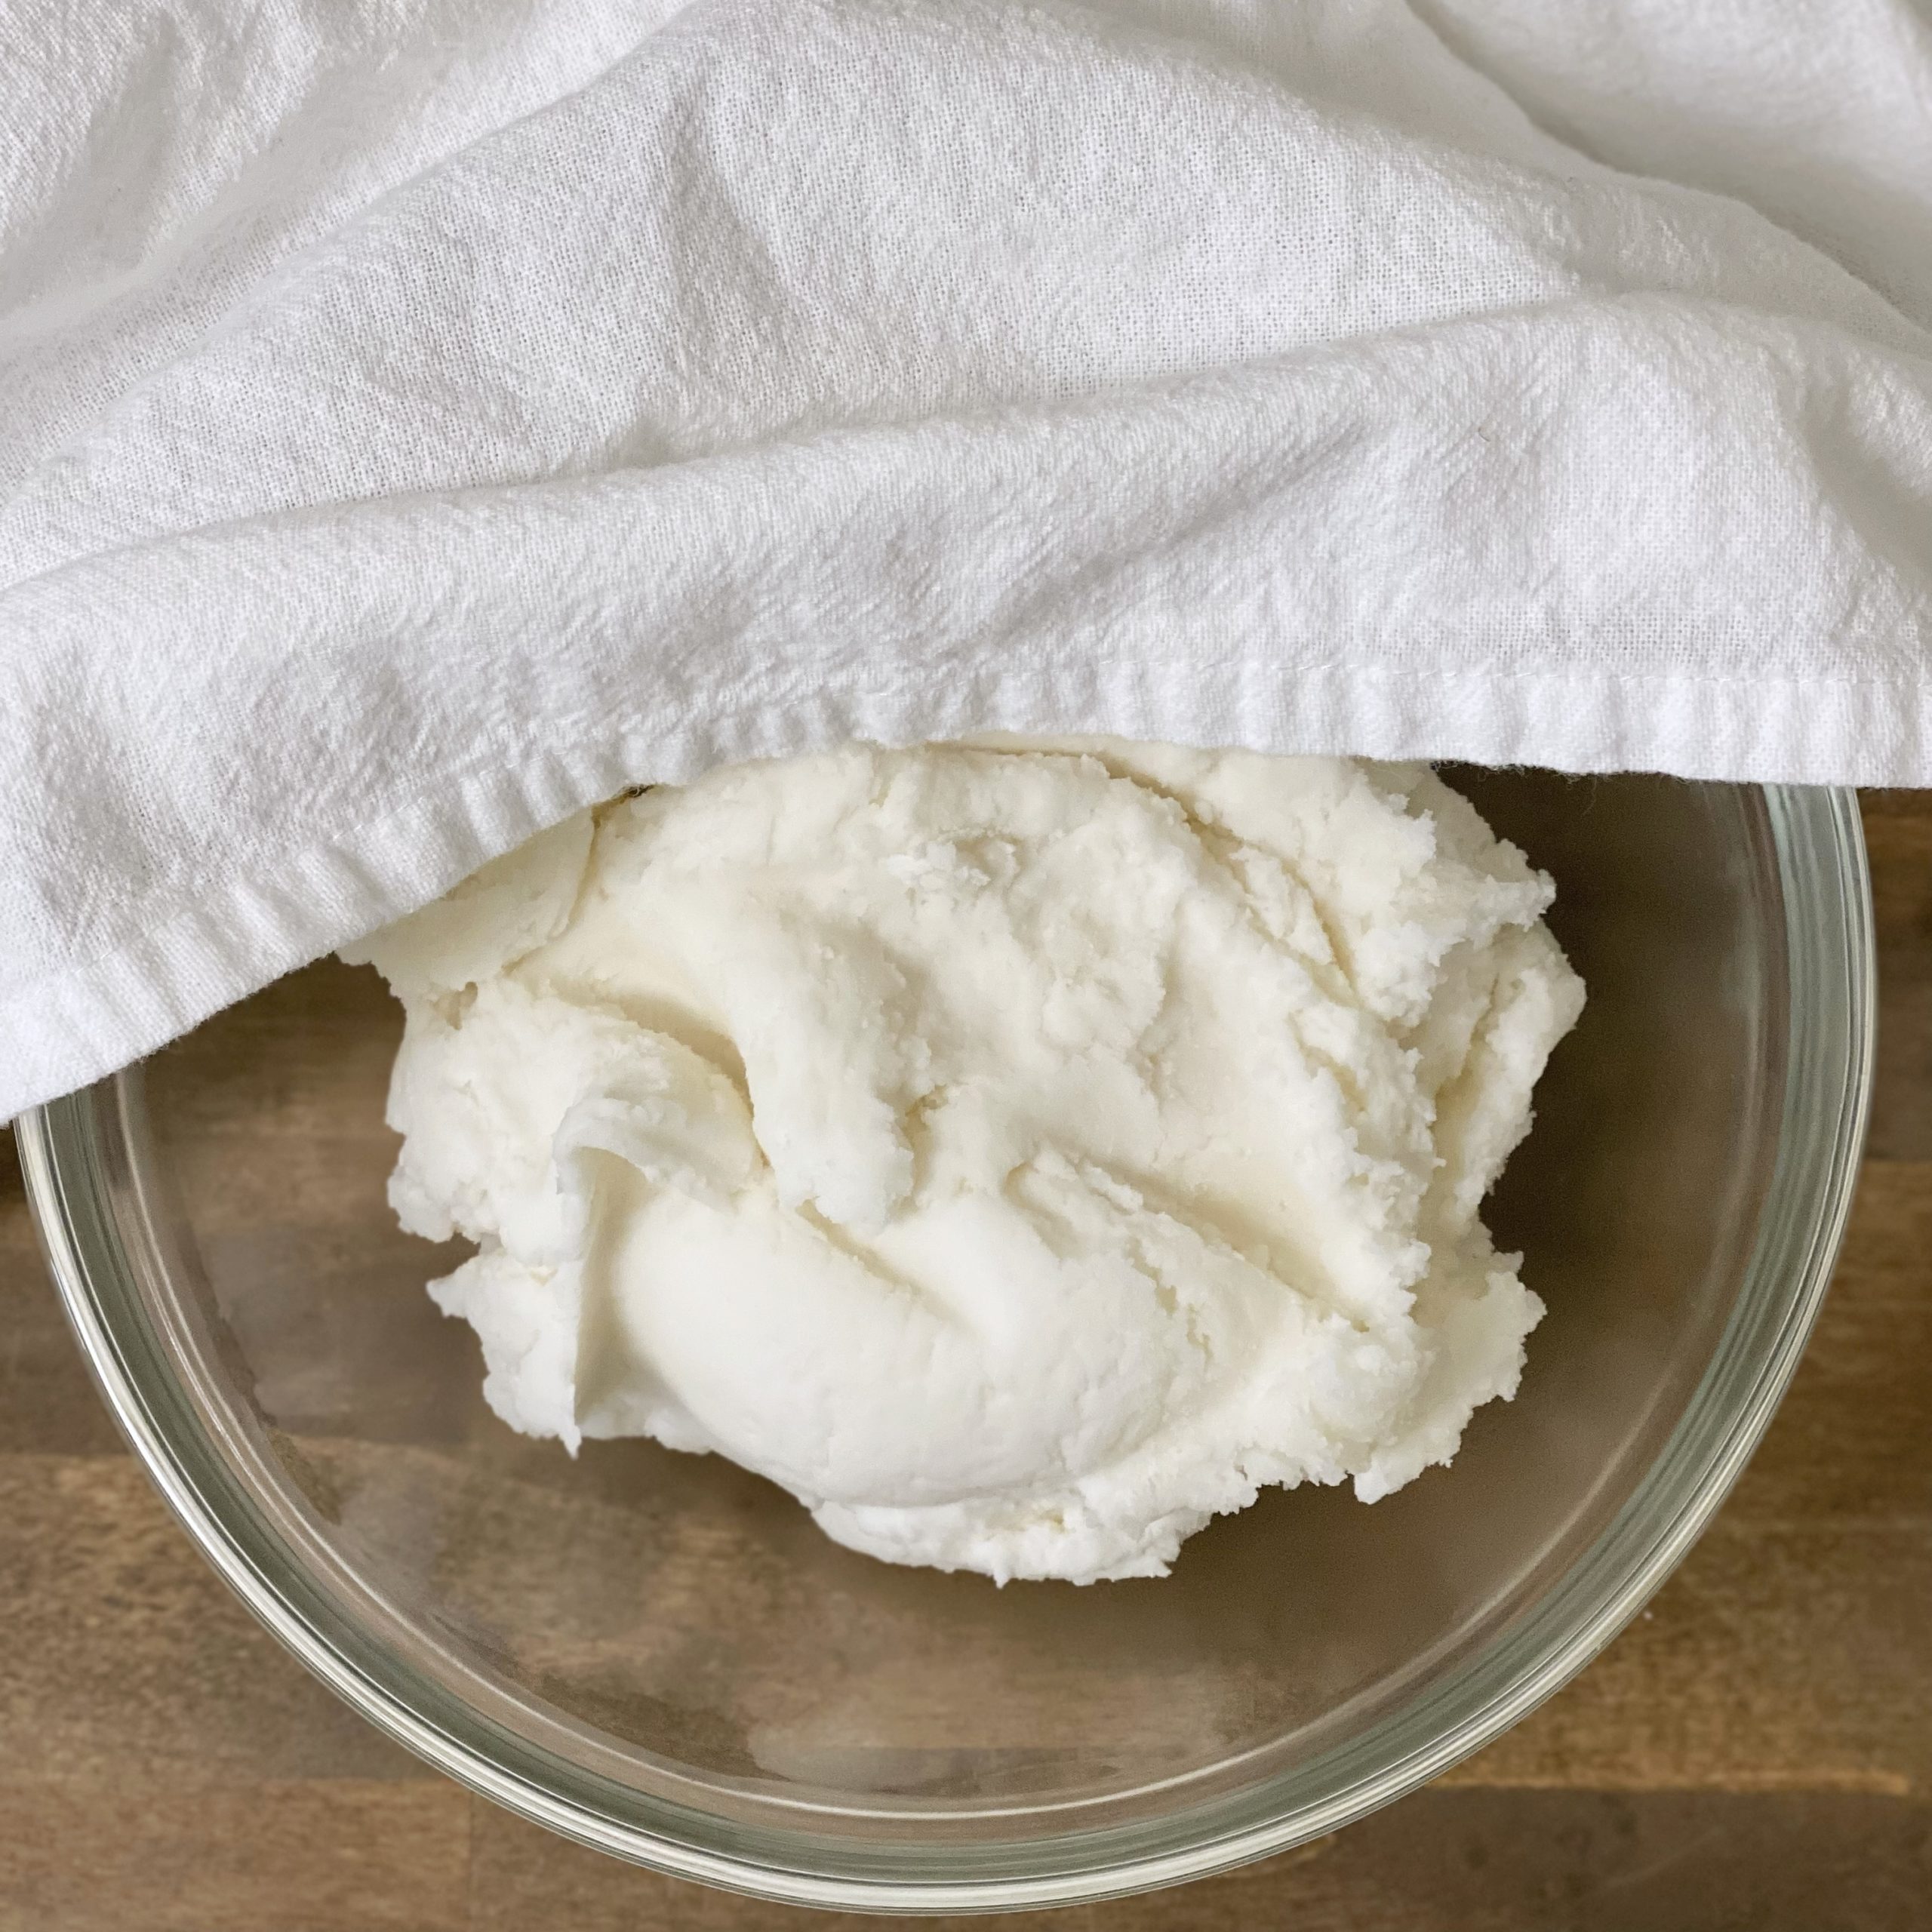 Baking soda dough cooling in a glass bowl with a towel halfway covering it.